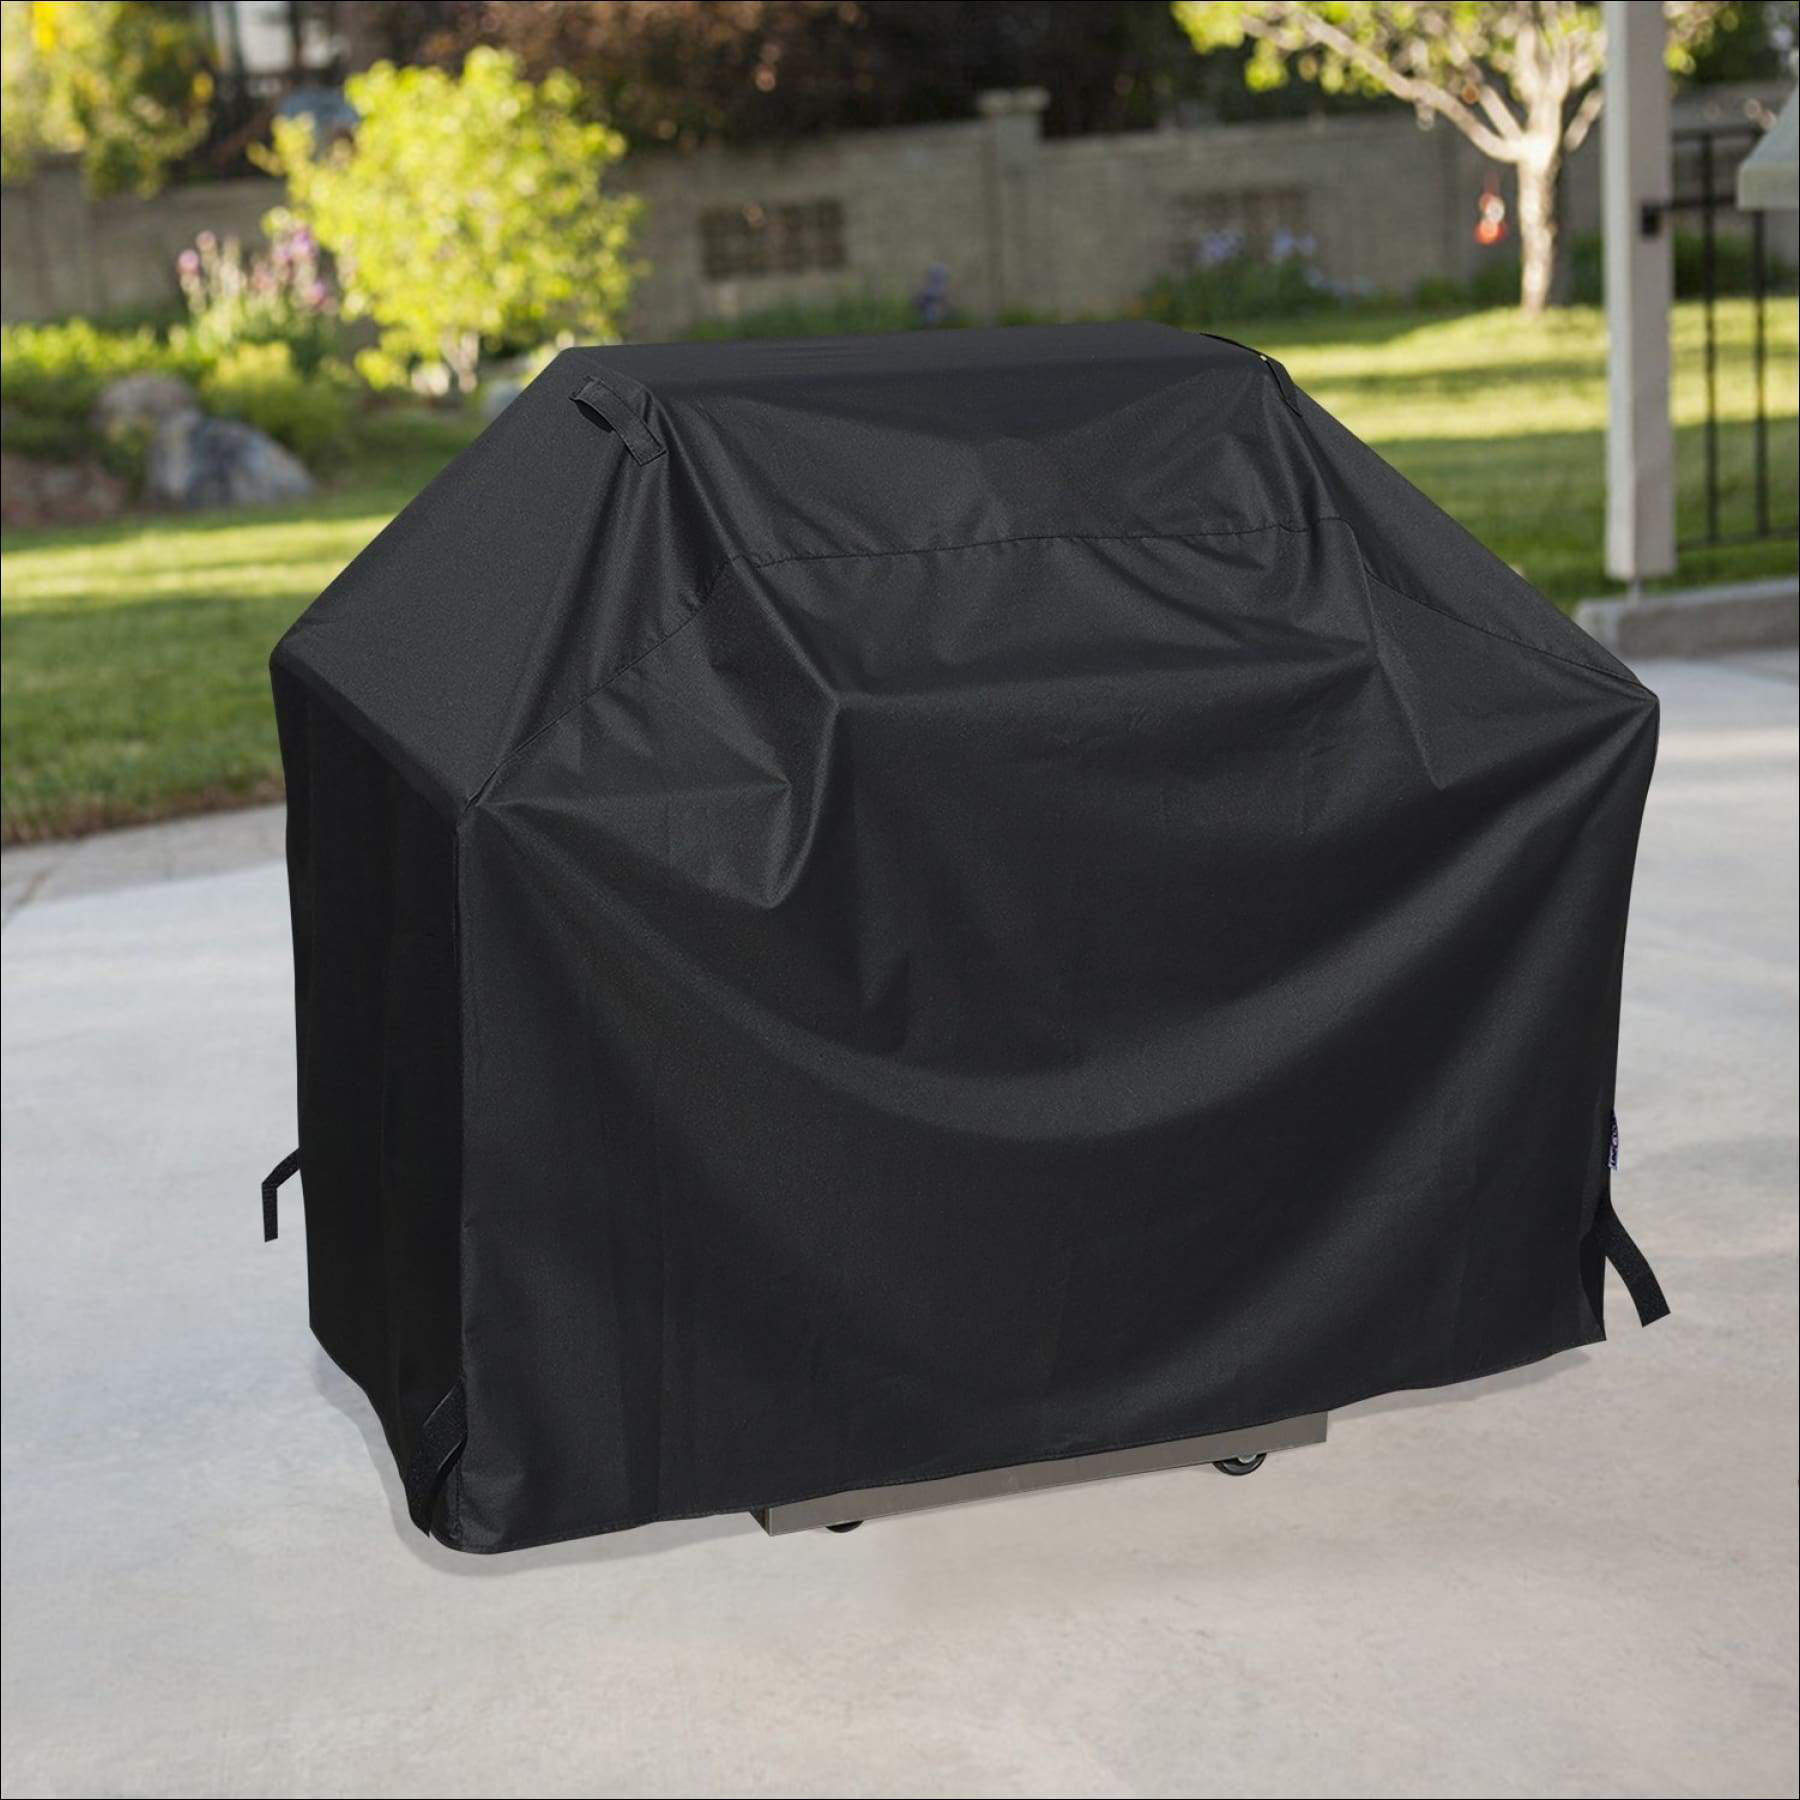 Heavy Duty Barbecue Grill Cover Waterproof UV Protection Outdoor BBQ Stove Cover 